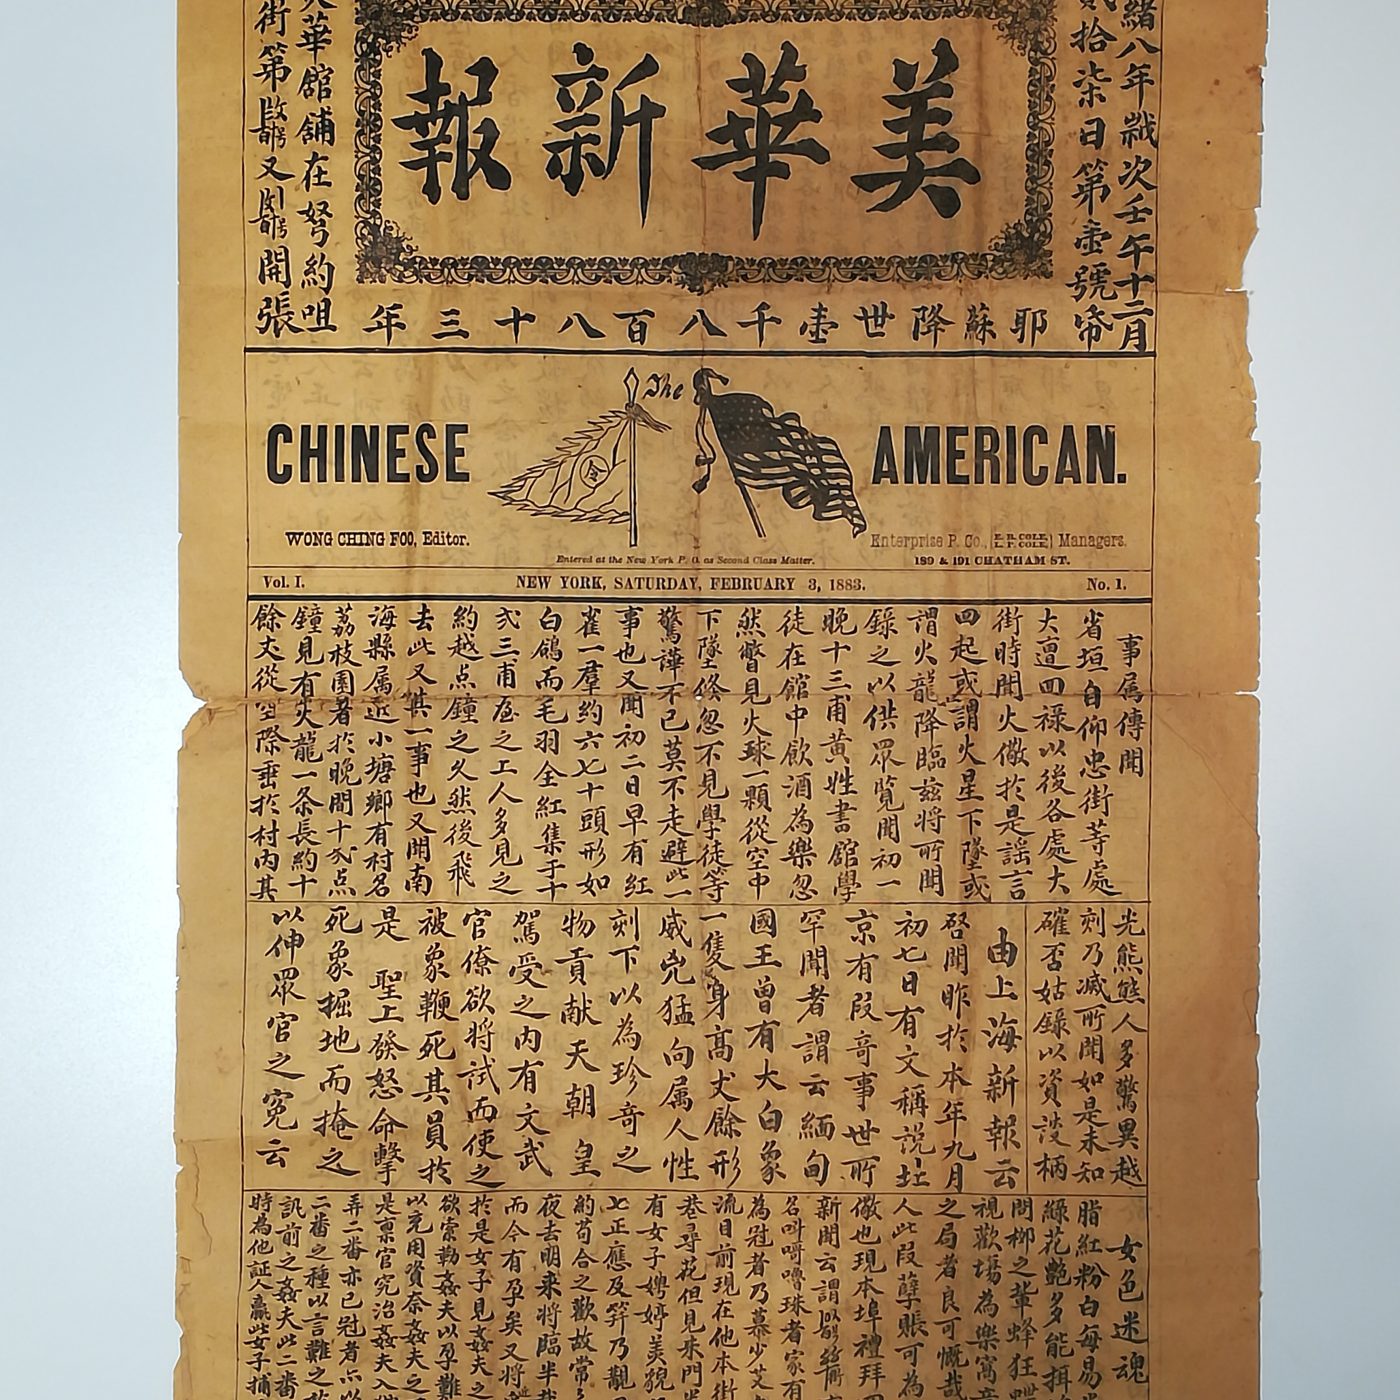 Page 1 of The Chinese American. Courtesy of Gordon C. H. Wang (王家軒). Museum of Chinese in America (MOCA) Collection.